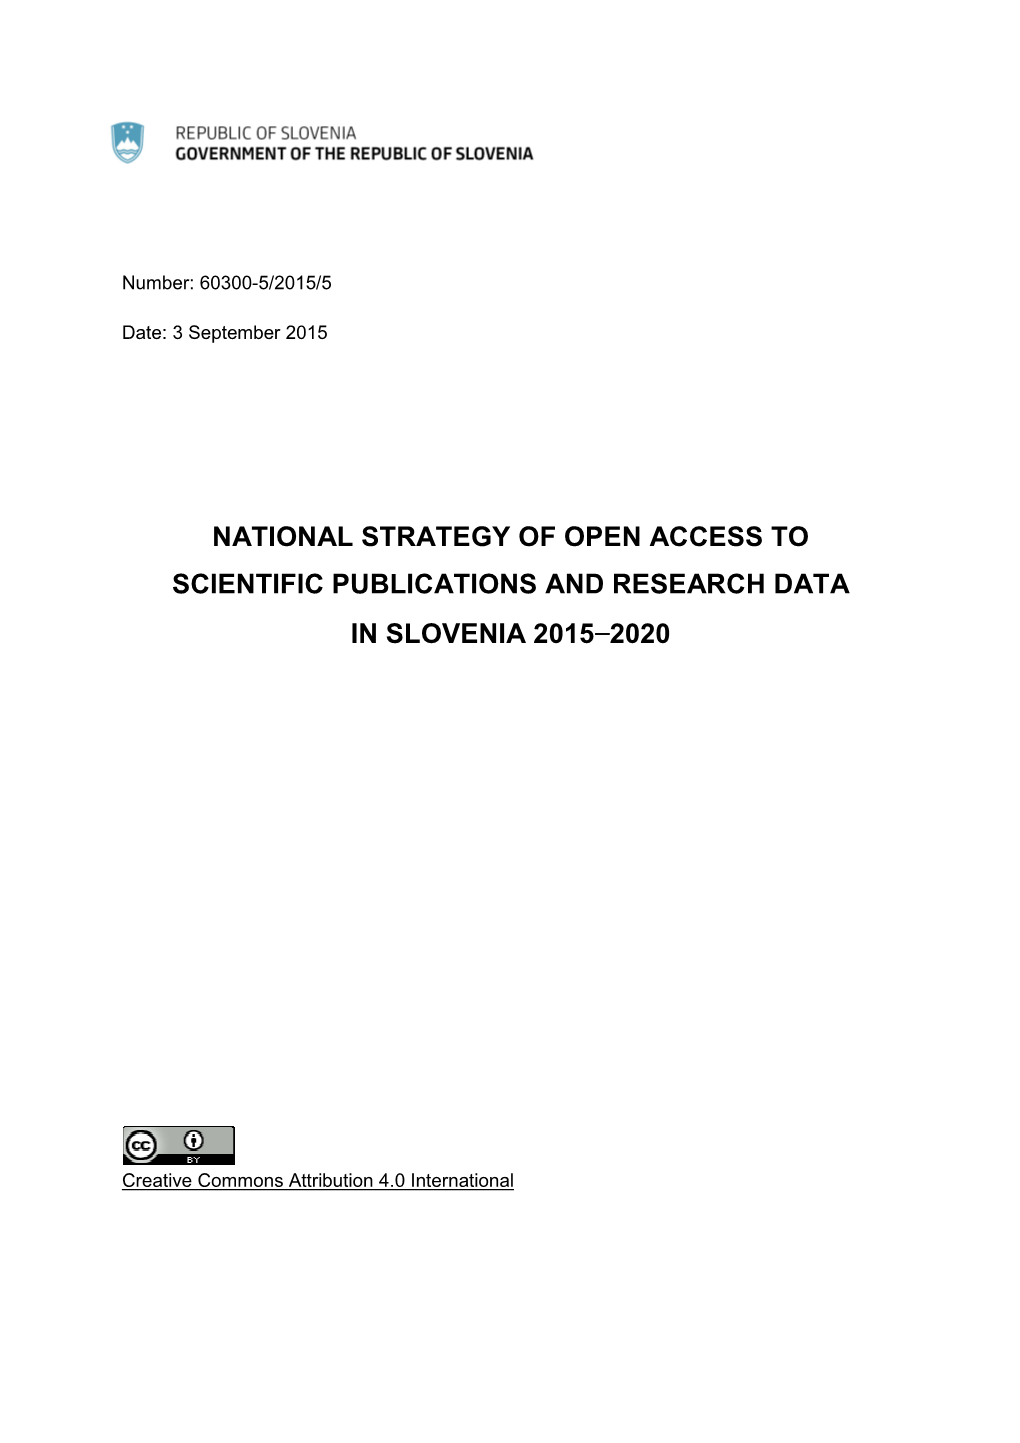 National Strategy for Open Access 7. 9. 2015